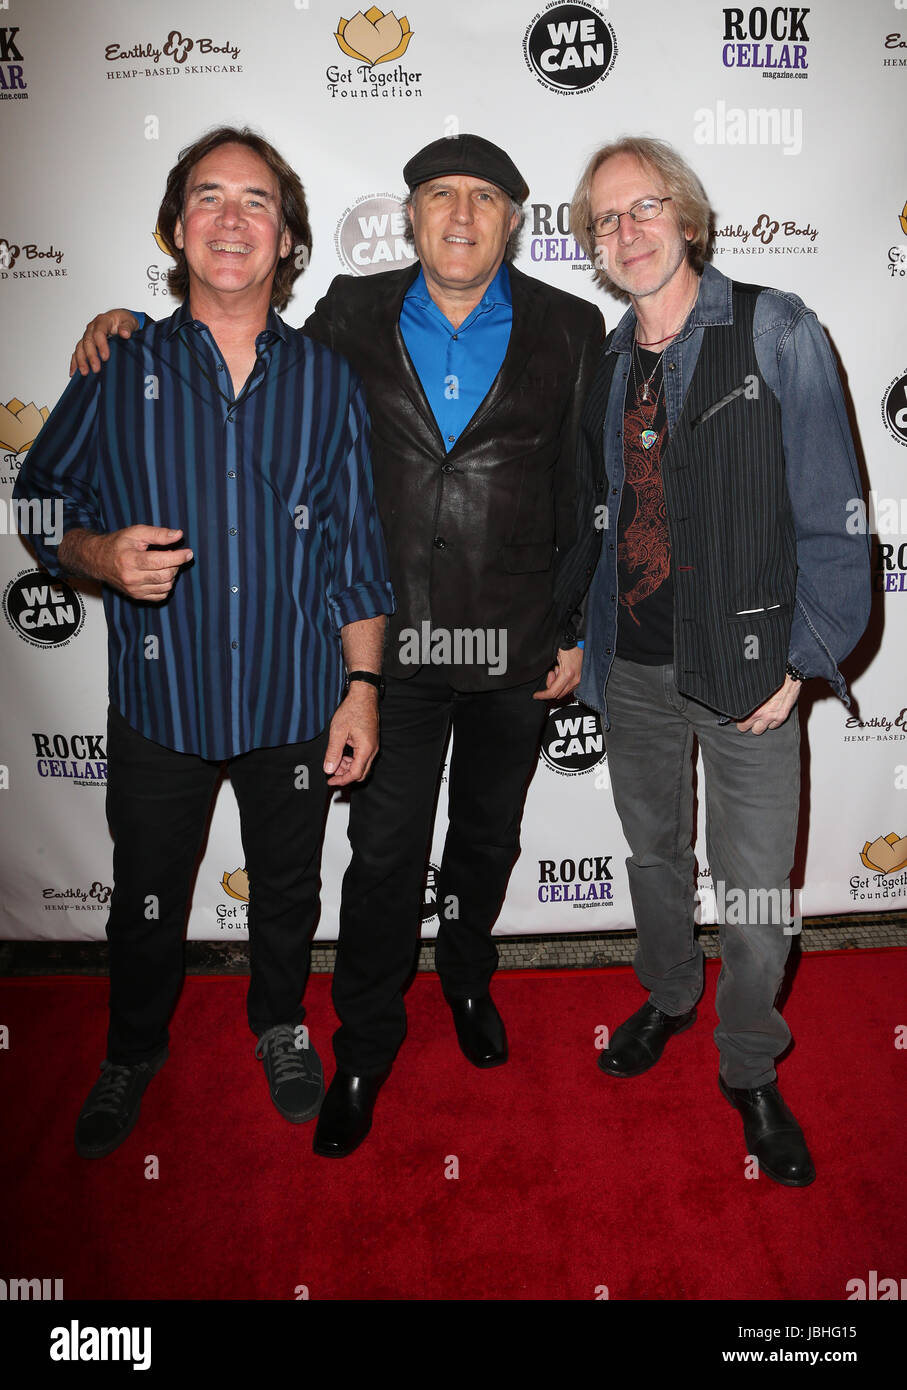 LOS ANGELES, CA June 10- Marc Mann, Carl Verheyen, Steve Postell, at The  Care Concert - There's